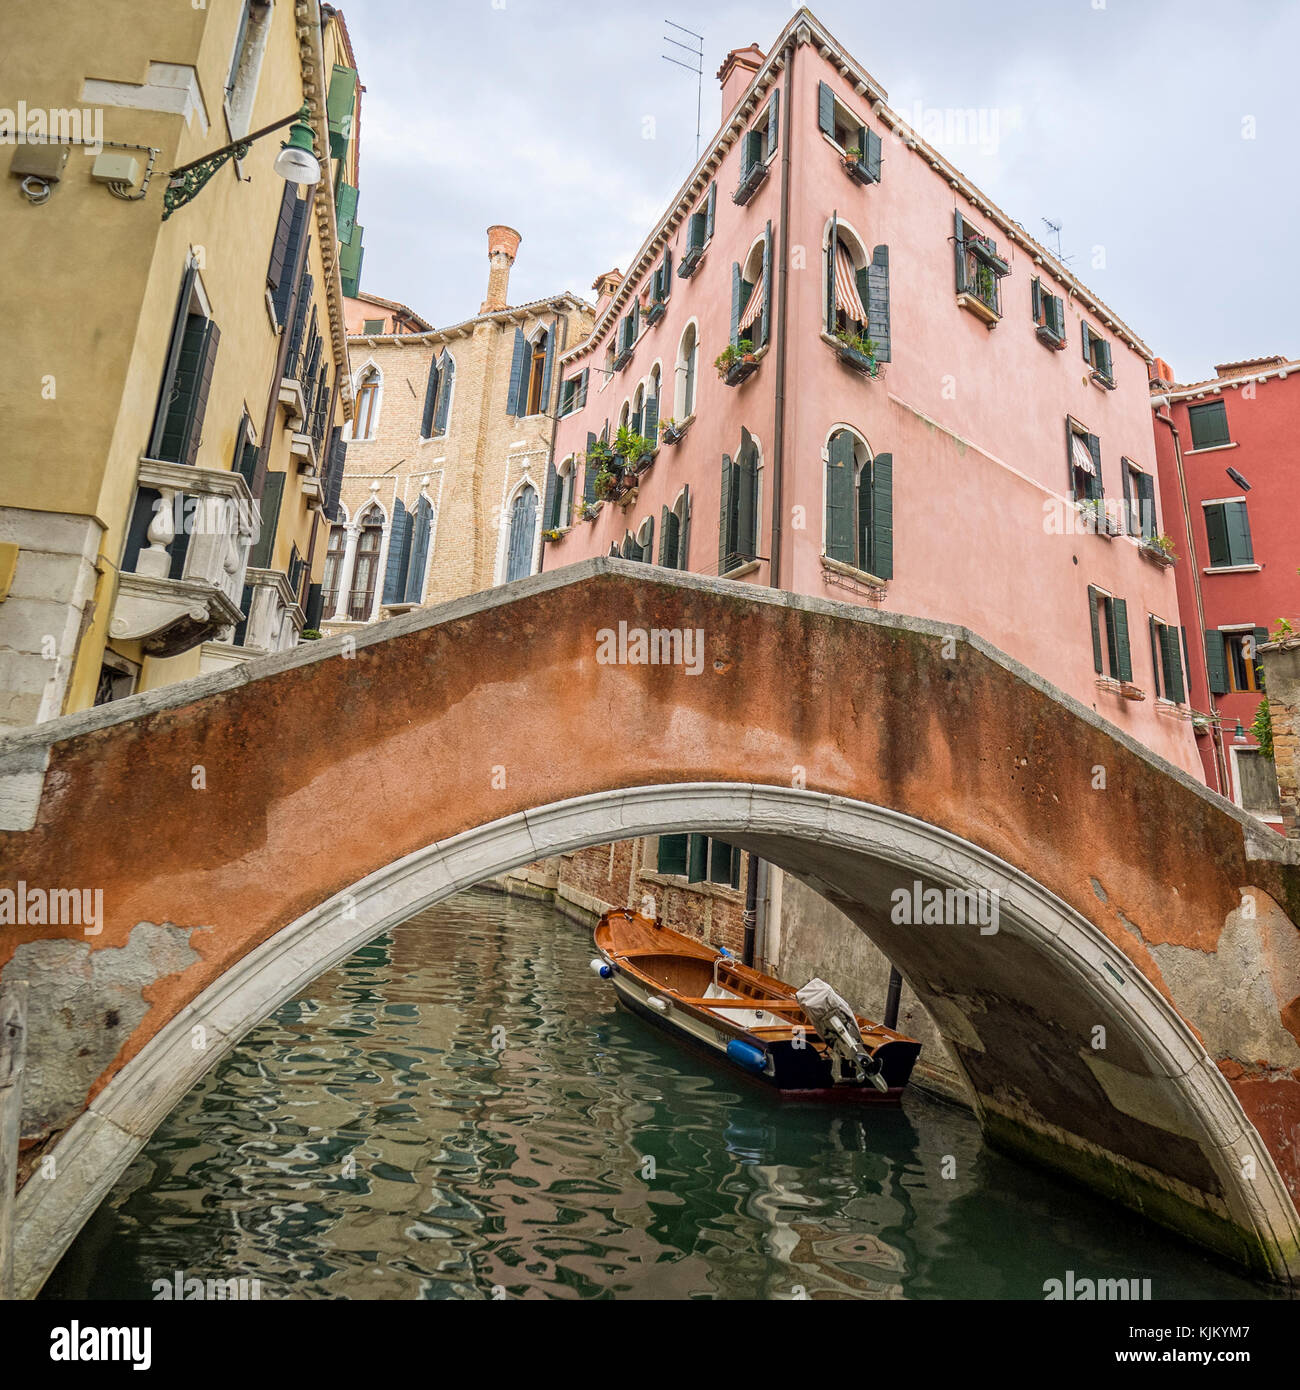 VENICE, ITALY - SEPTEMBER 12, 2017:  Bridge over canal seen against brightly coloured buildings Stock Photo